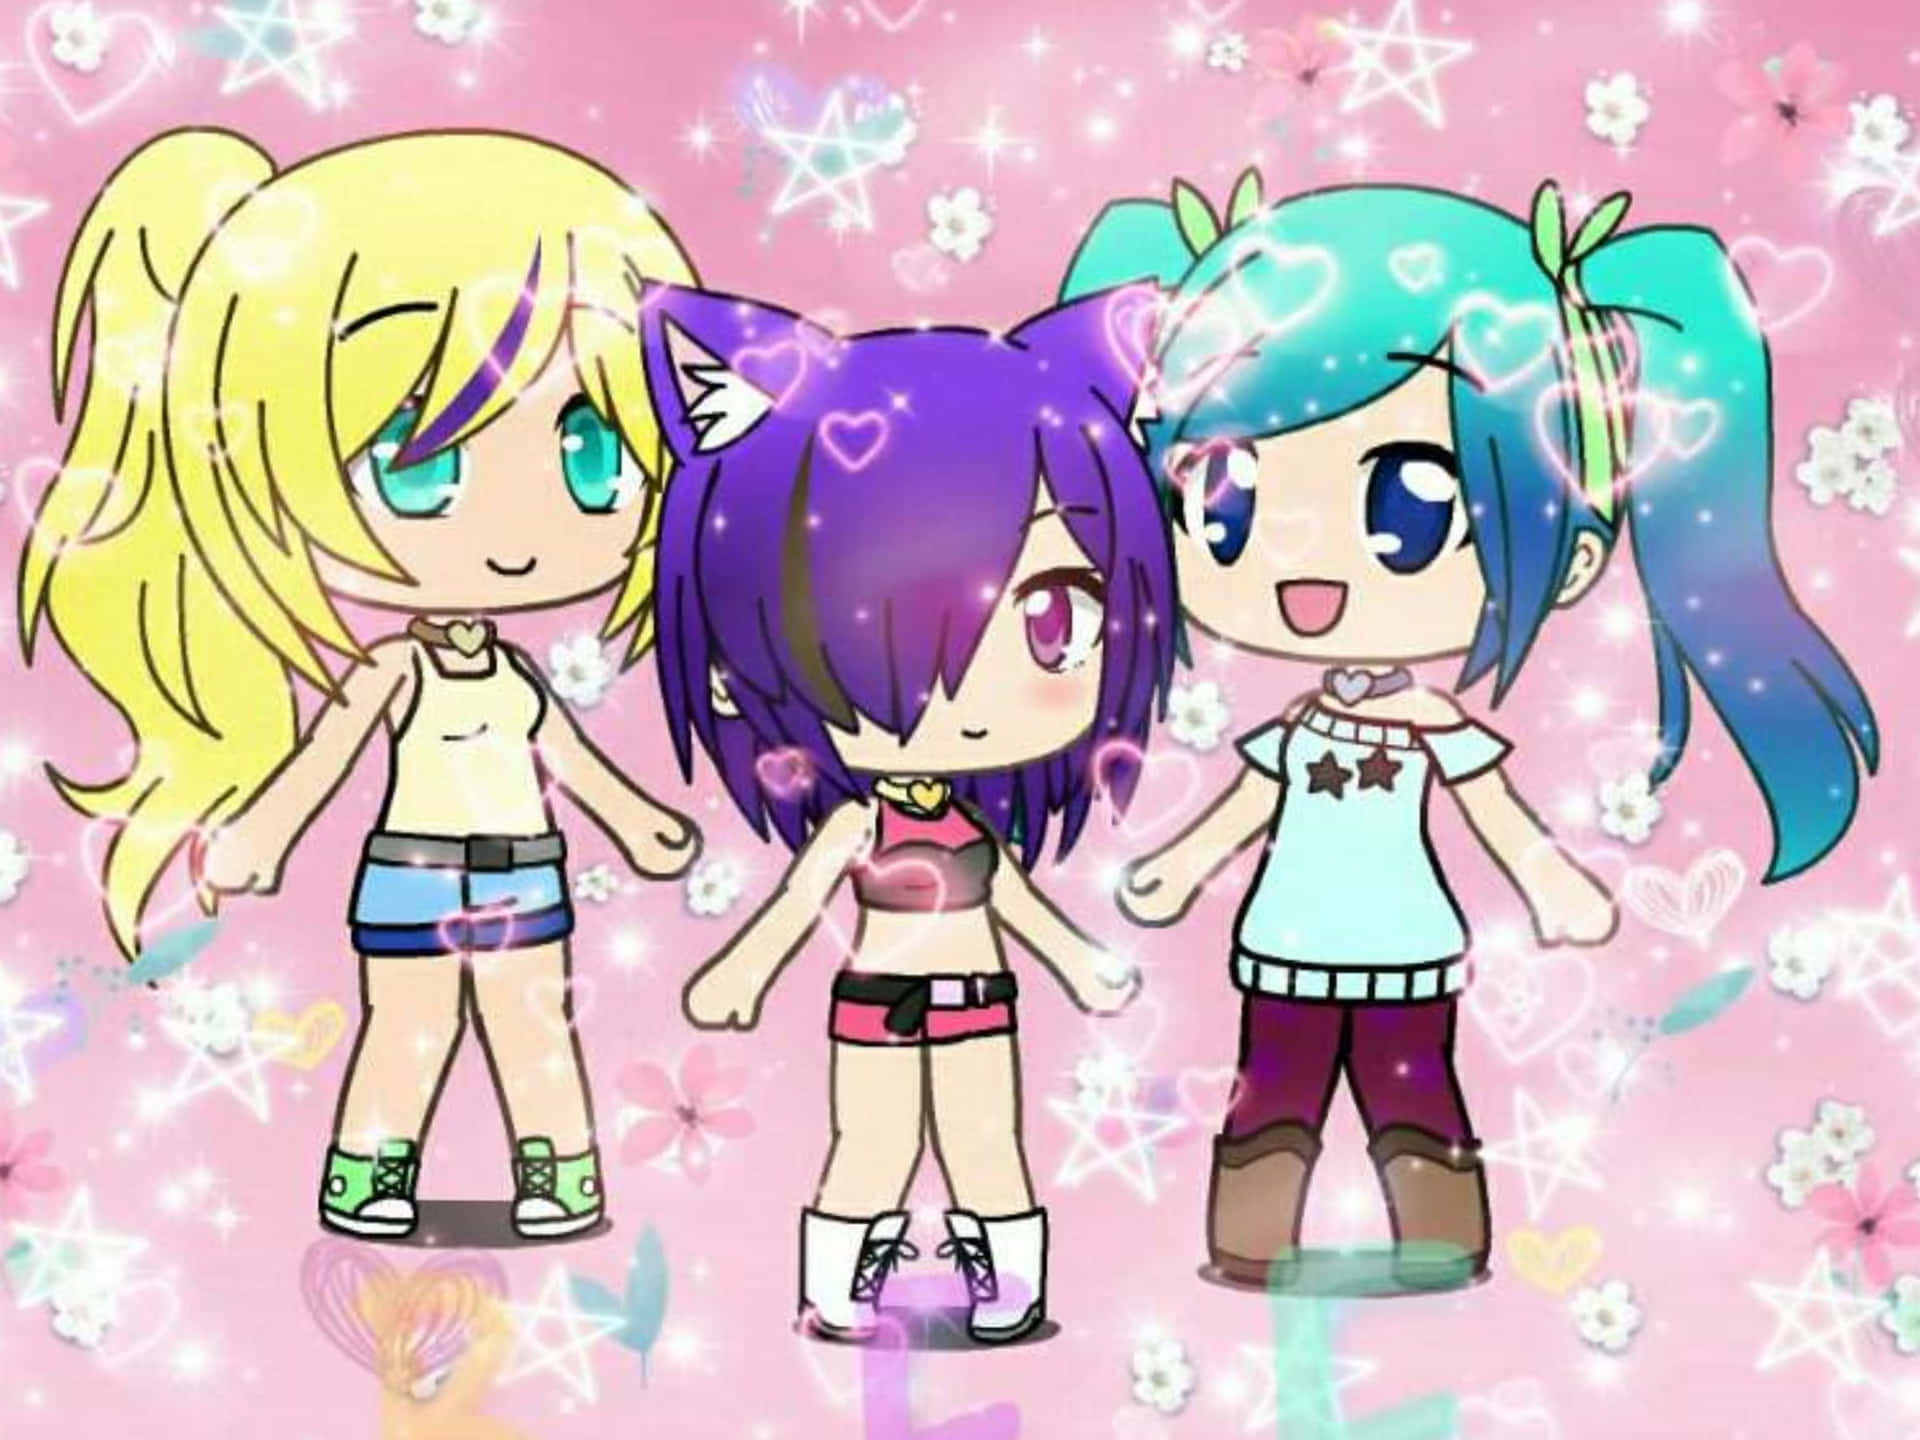 500 Cute Gacha Life Boy Wallpapers Background Beautiful Best Available For Download Cute Gacha Life Boy Images Free On Zicxacomphotos Zicxa Photos